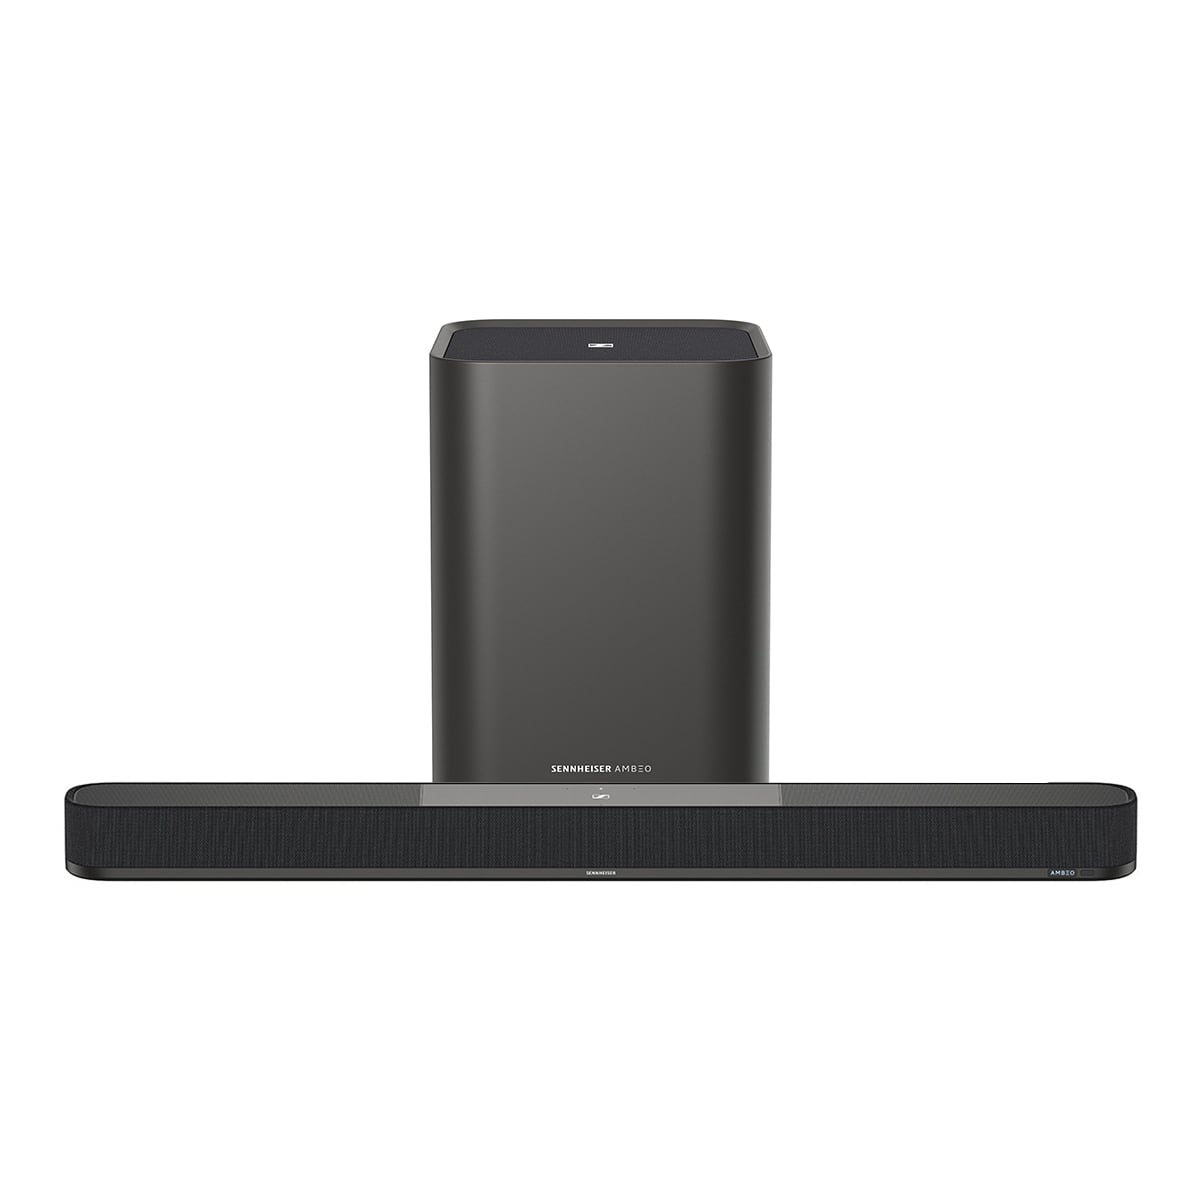 Sennheiser AMBEO Soundbar Plus 7.1.4 Channel Soundbar with Dolby Atmos and DTS:X with Ambeo Sub 8in 350W Wireless Subwoofer with